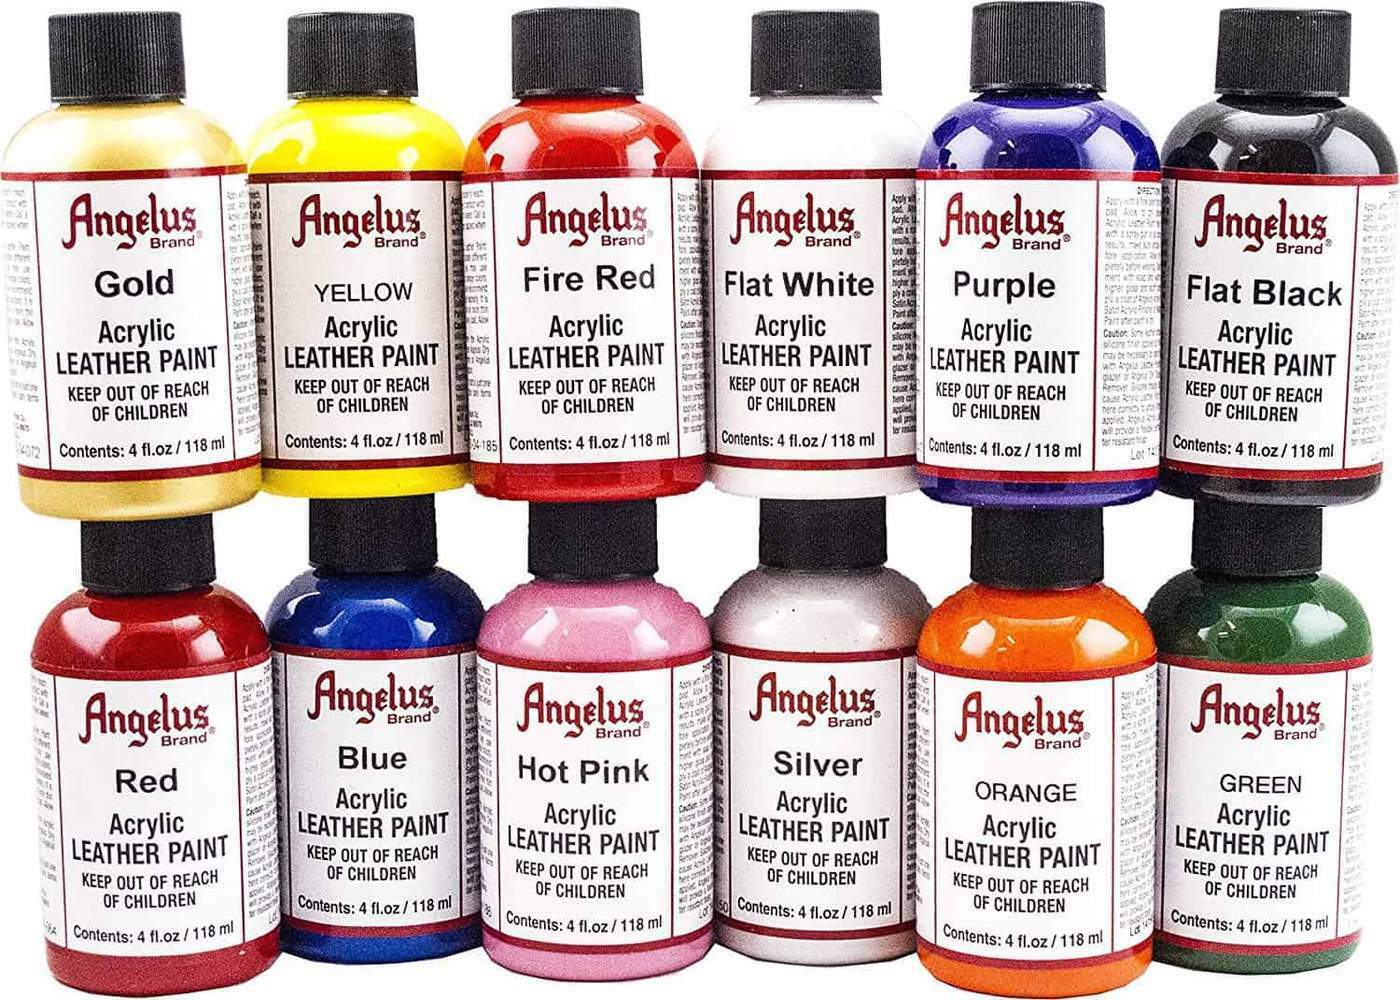 Angelus Acrylic Leather Paint / Dye 4 Oz Bottle New For Shoes Bags Boots